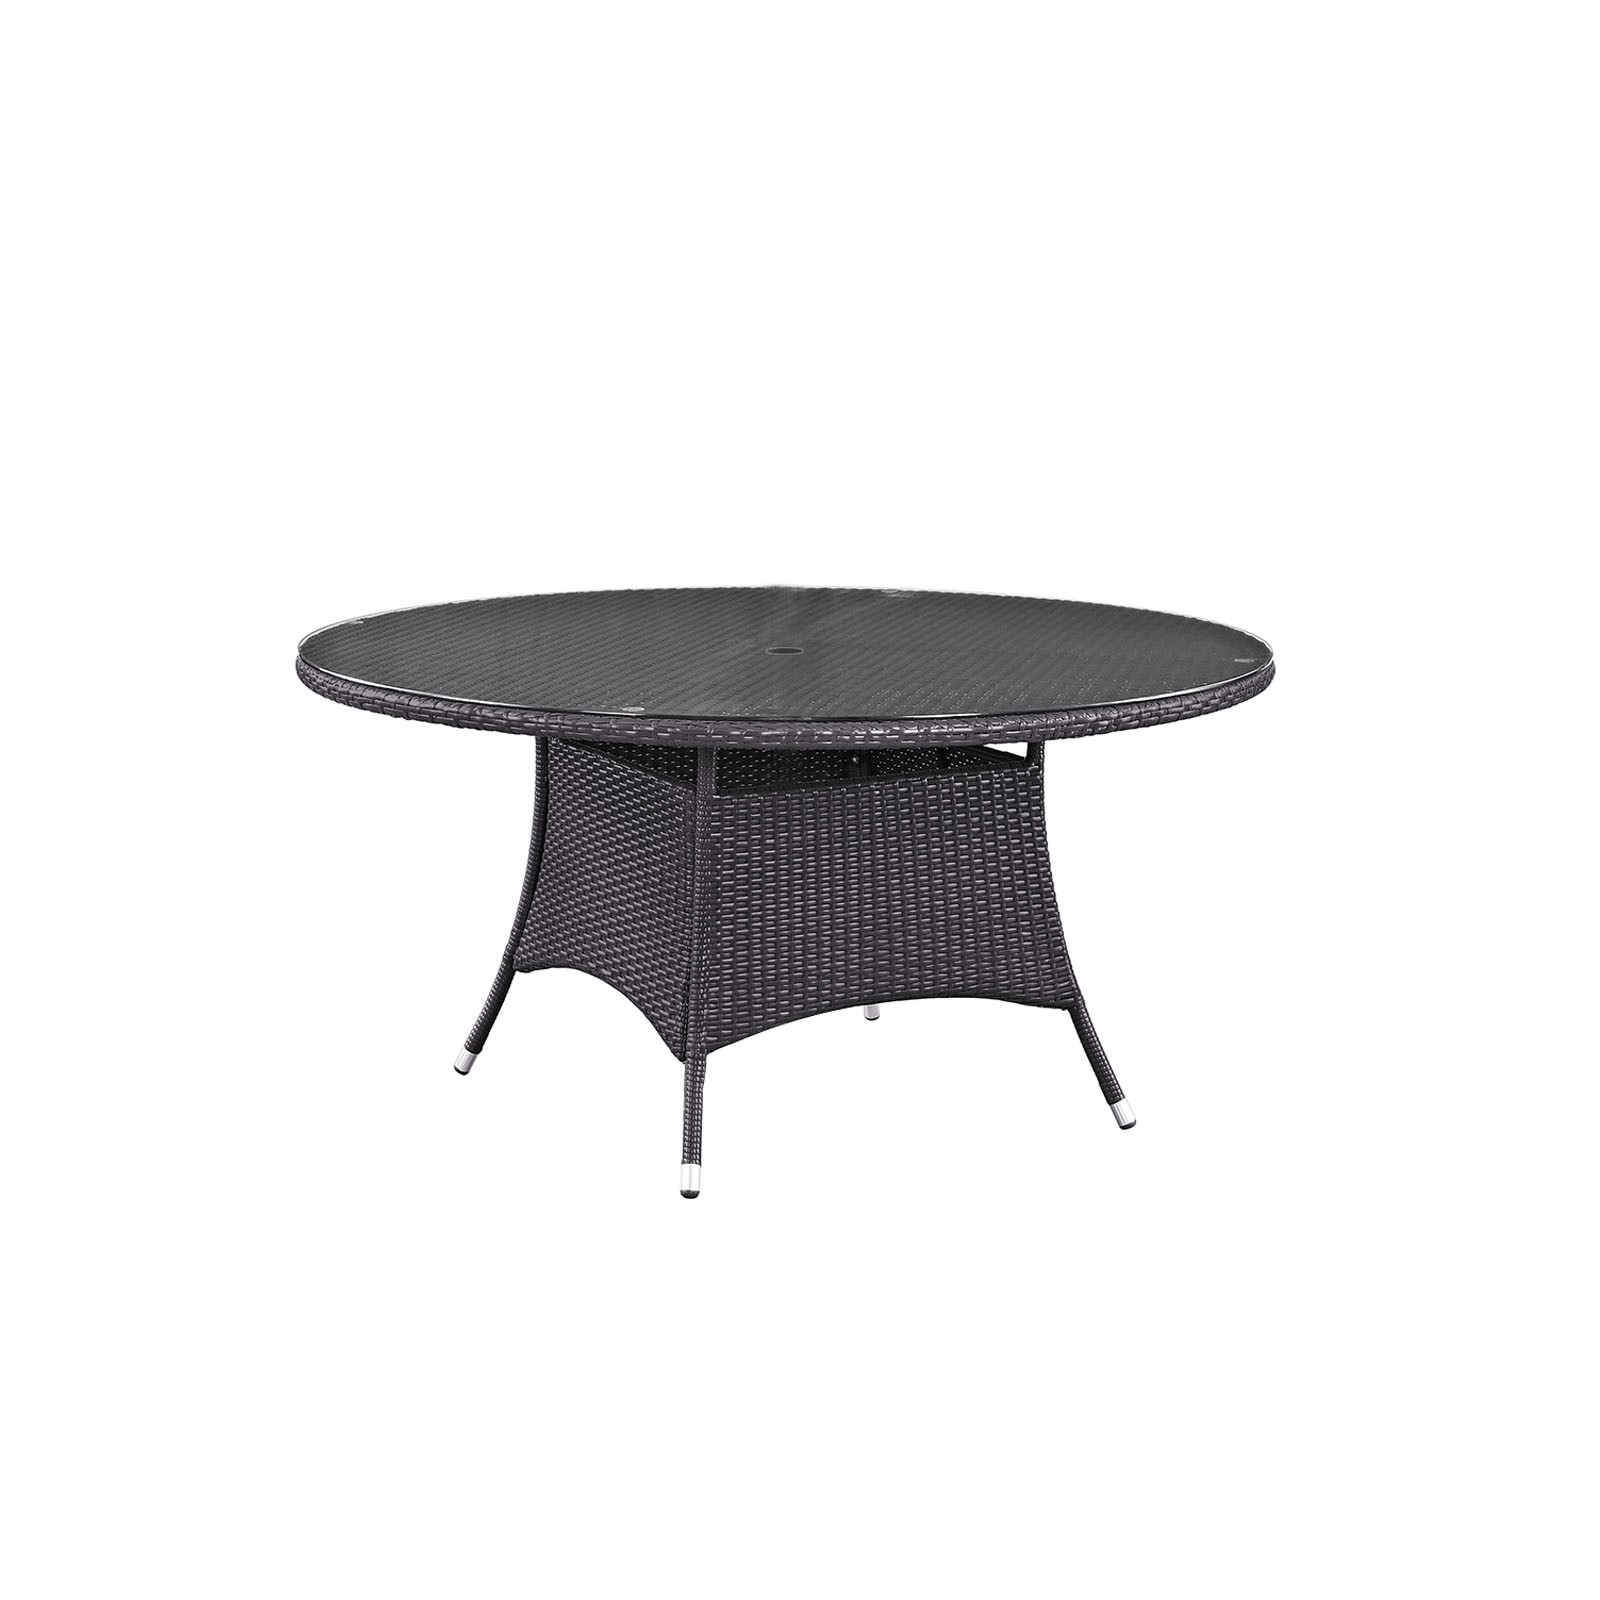 Convene 59" Round Outdoor Patio Dining Table